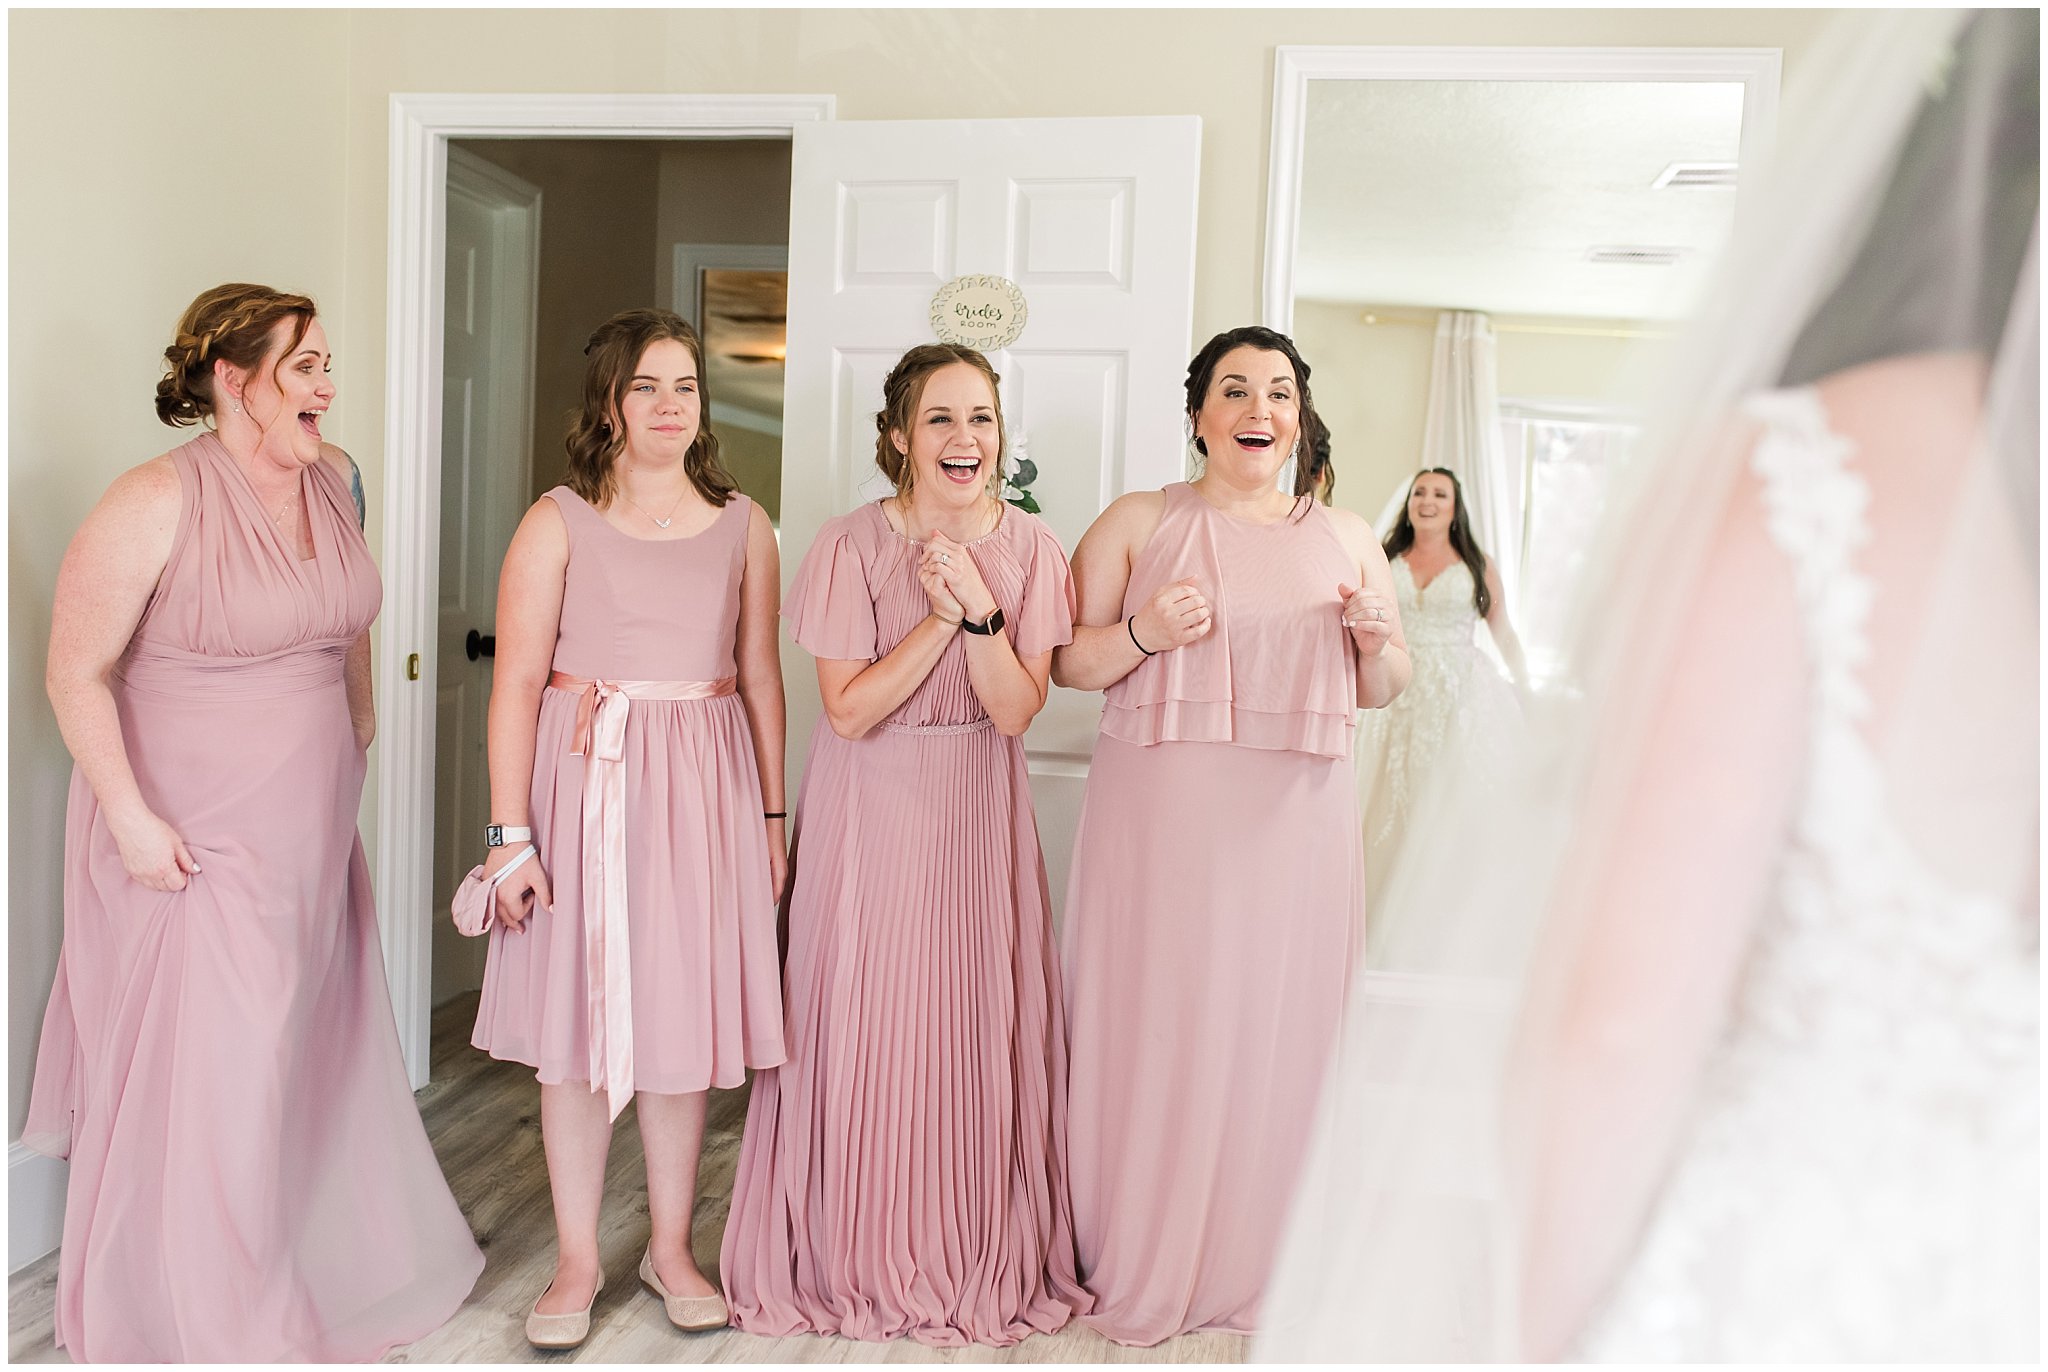 Bridesmaid first look reaction | Oak Hills Utah Dusty Rose and Gray Summer Wedding | Jessie and Dallin Photography